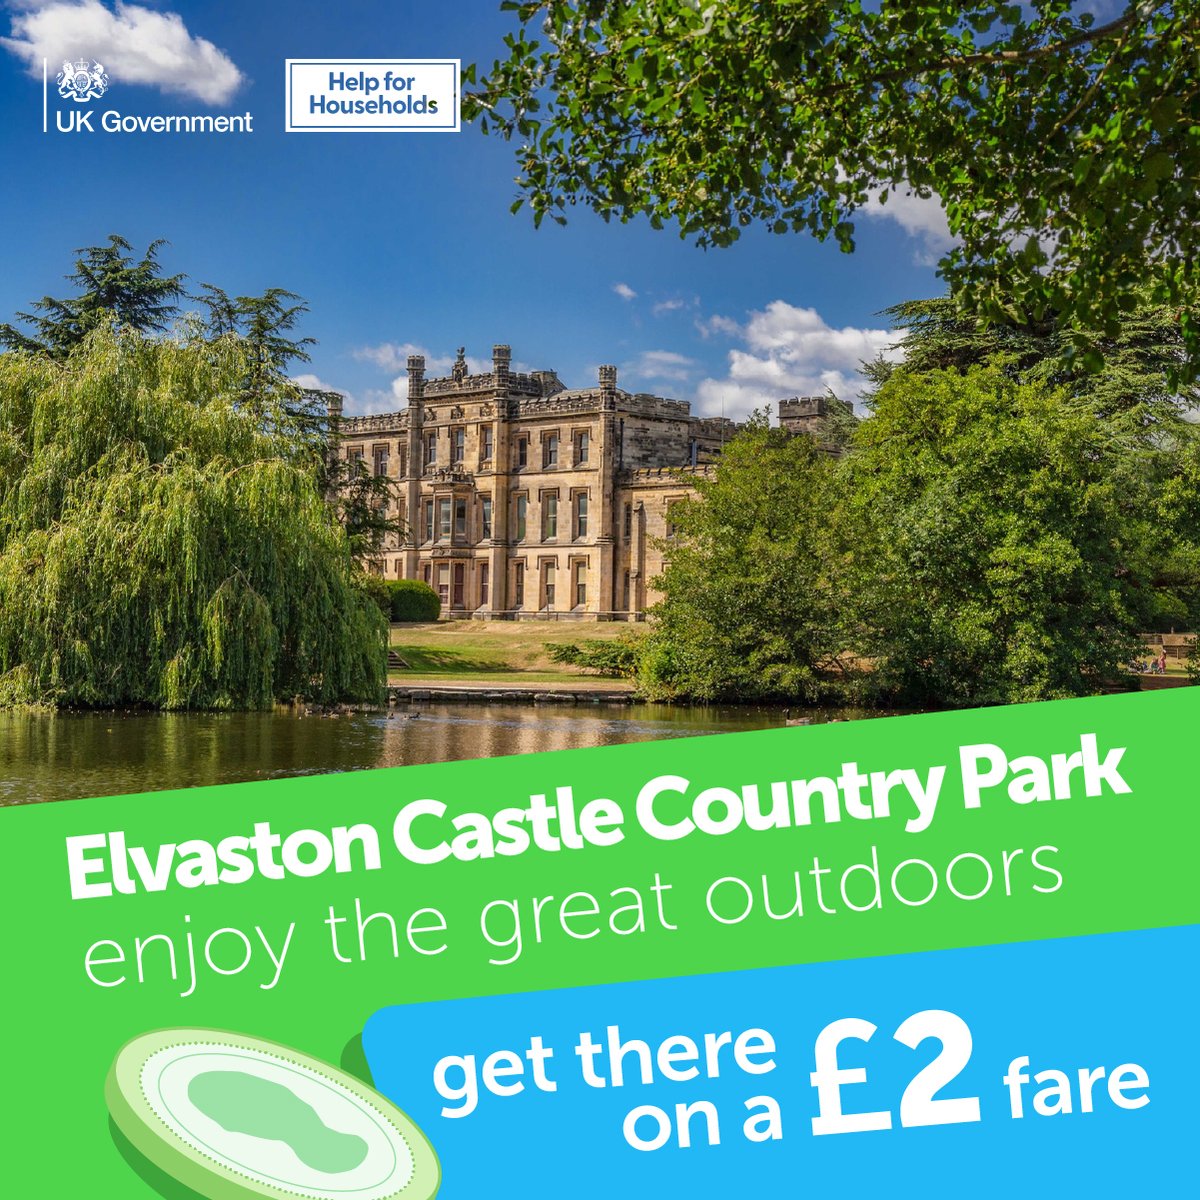 Enjoy some fresh air and discover new destinations🌳 Elvaston Castle Country Park is a historic estate with parkland, woodland and gardens near to Derby and Nottingham. Let us take you there on the £2 fare 🚍 Plan your trip today ⤵️ orlo.uk/Vrtuu